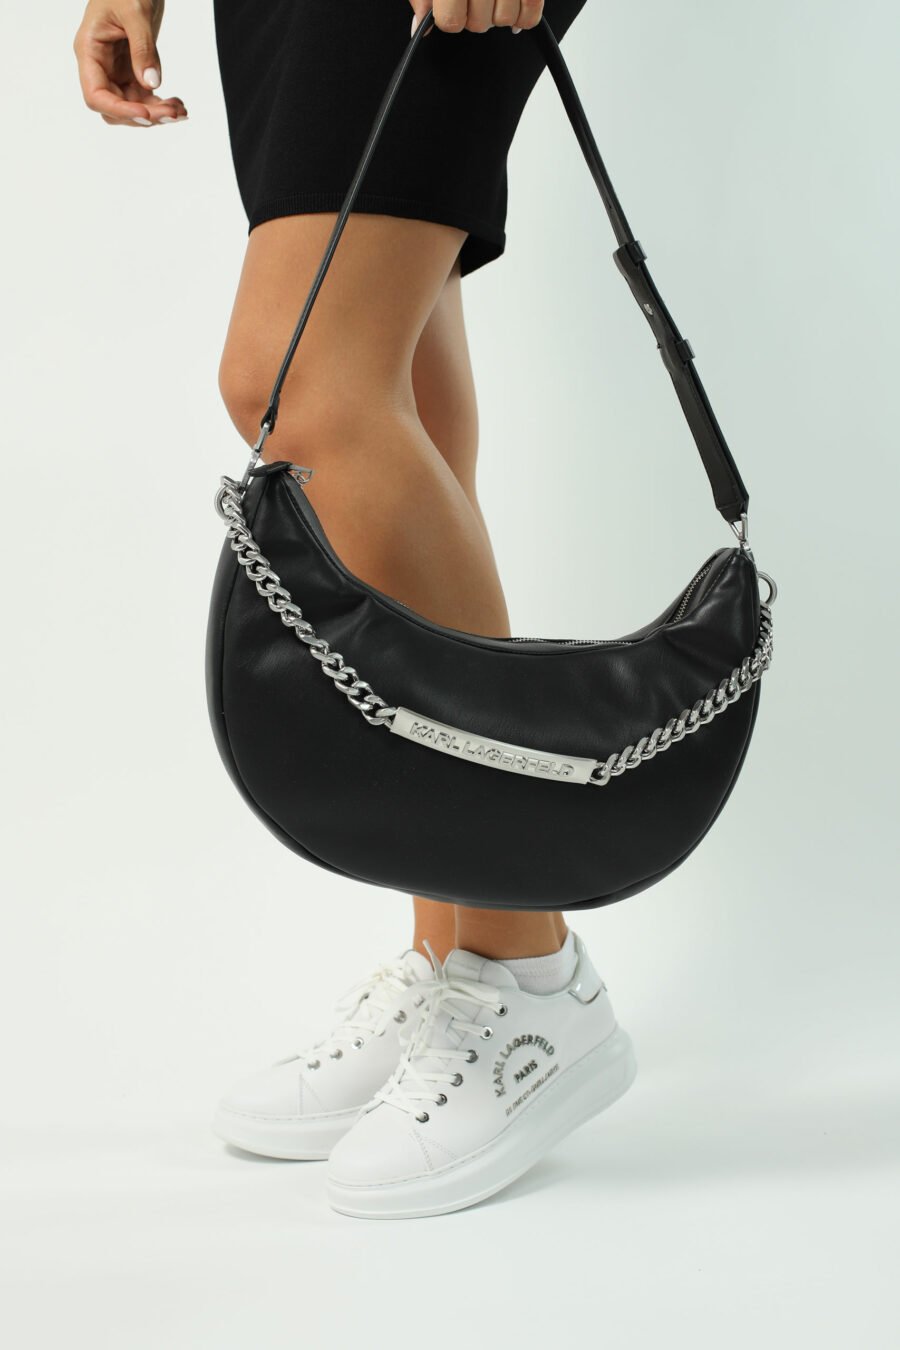 Black hobo bag with silver chain - Photos 2422